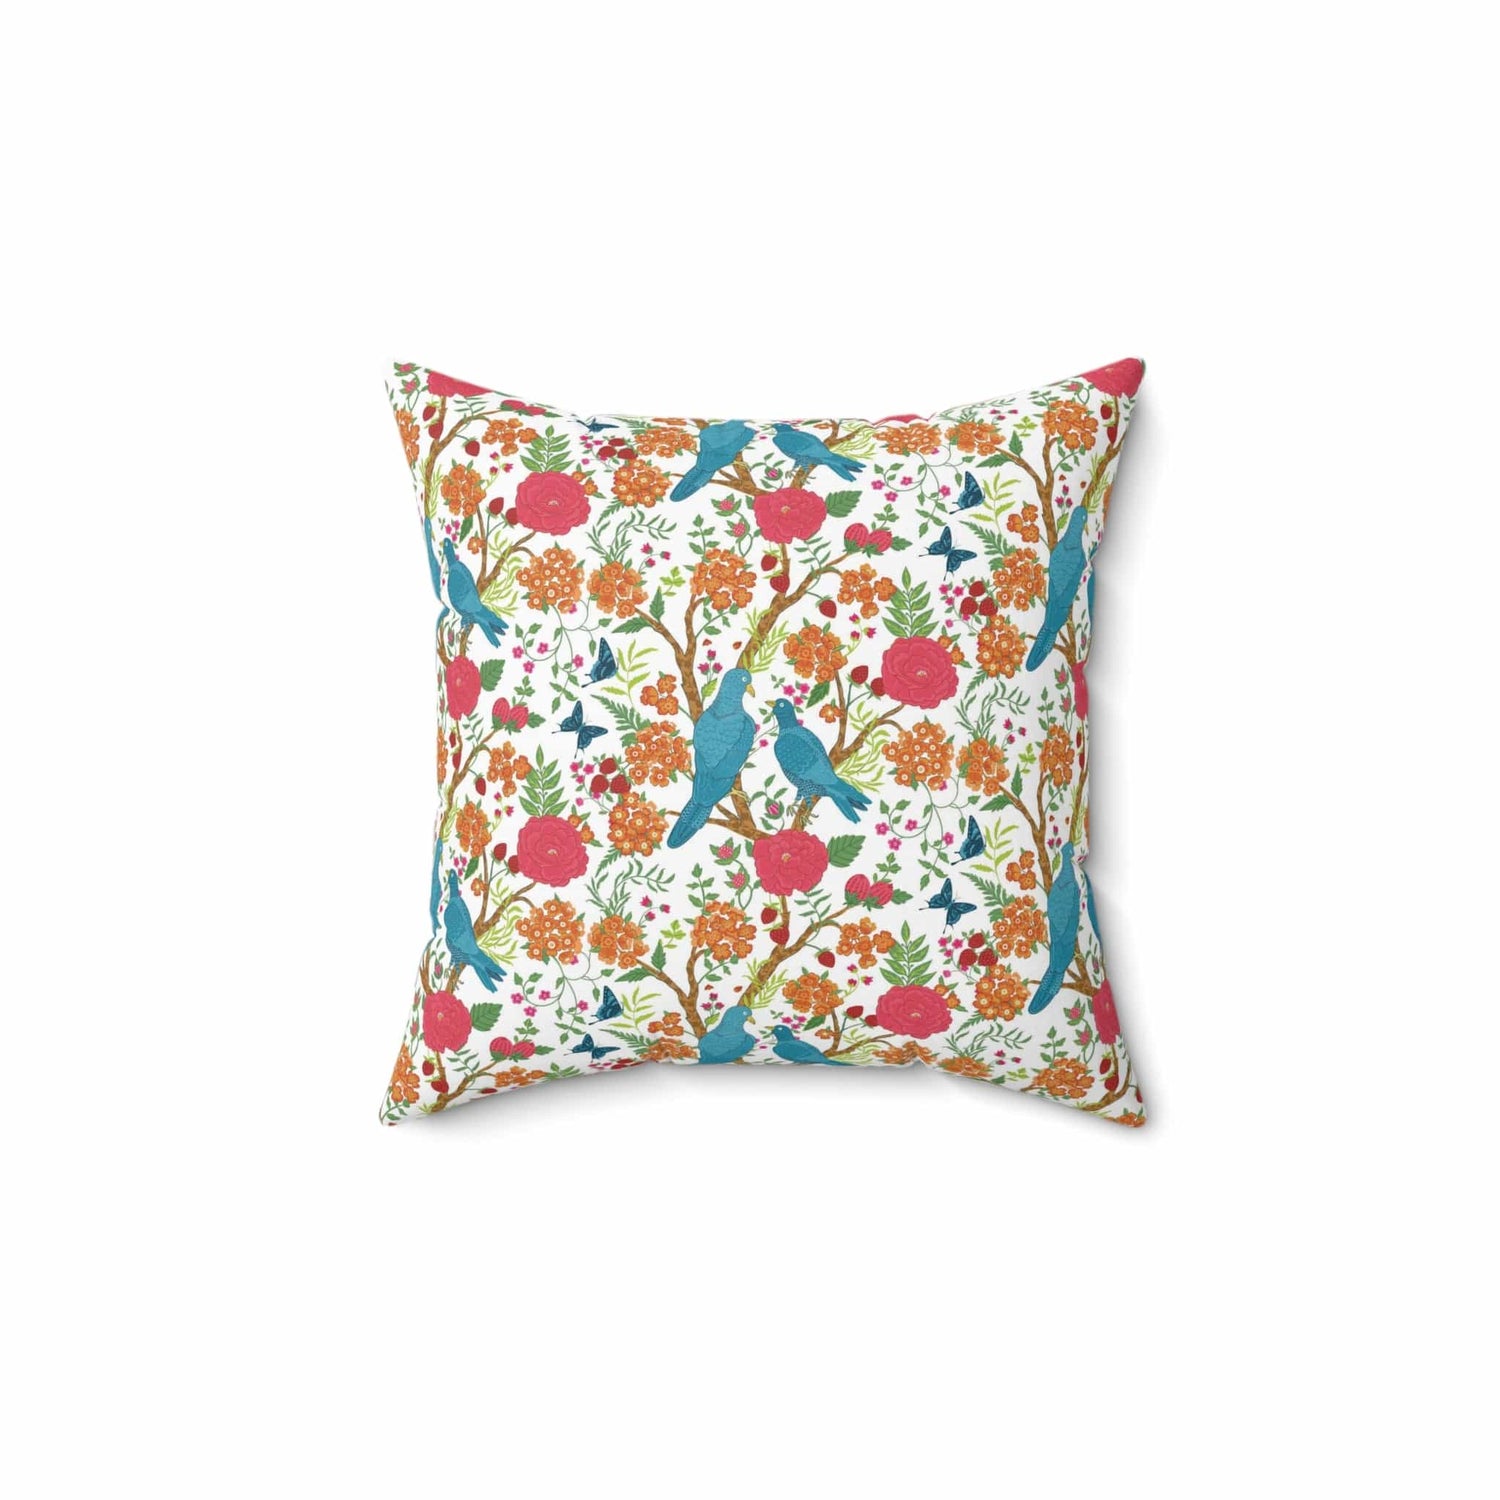 Kate McEnroe New York Chinoiserie Tropical Bird Garden Pillow with Insert, Floral Cushion, Botanical Bird Throw Pillow KM13809924 Throw Pillows 14&quot; × 14&quot; 12261909374163439717